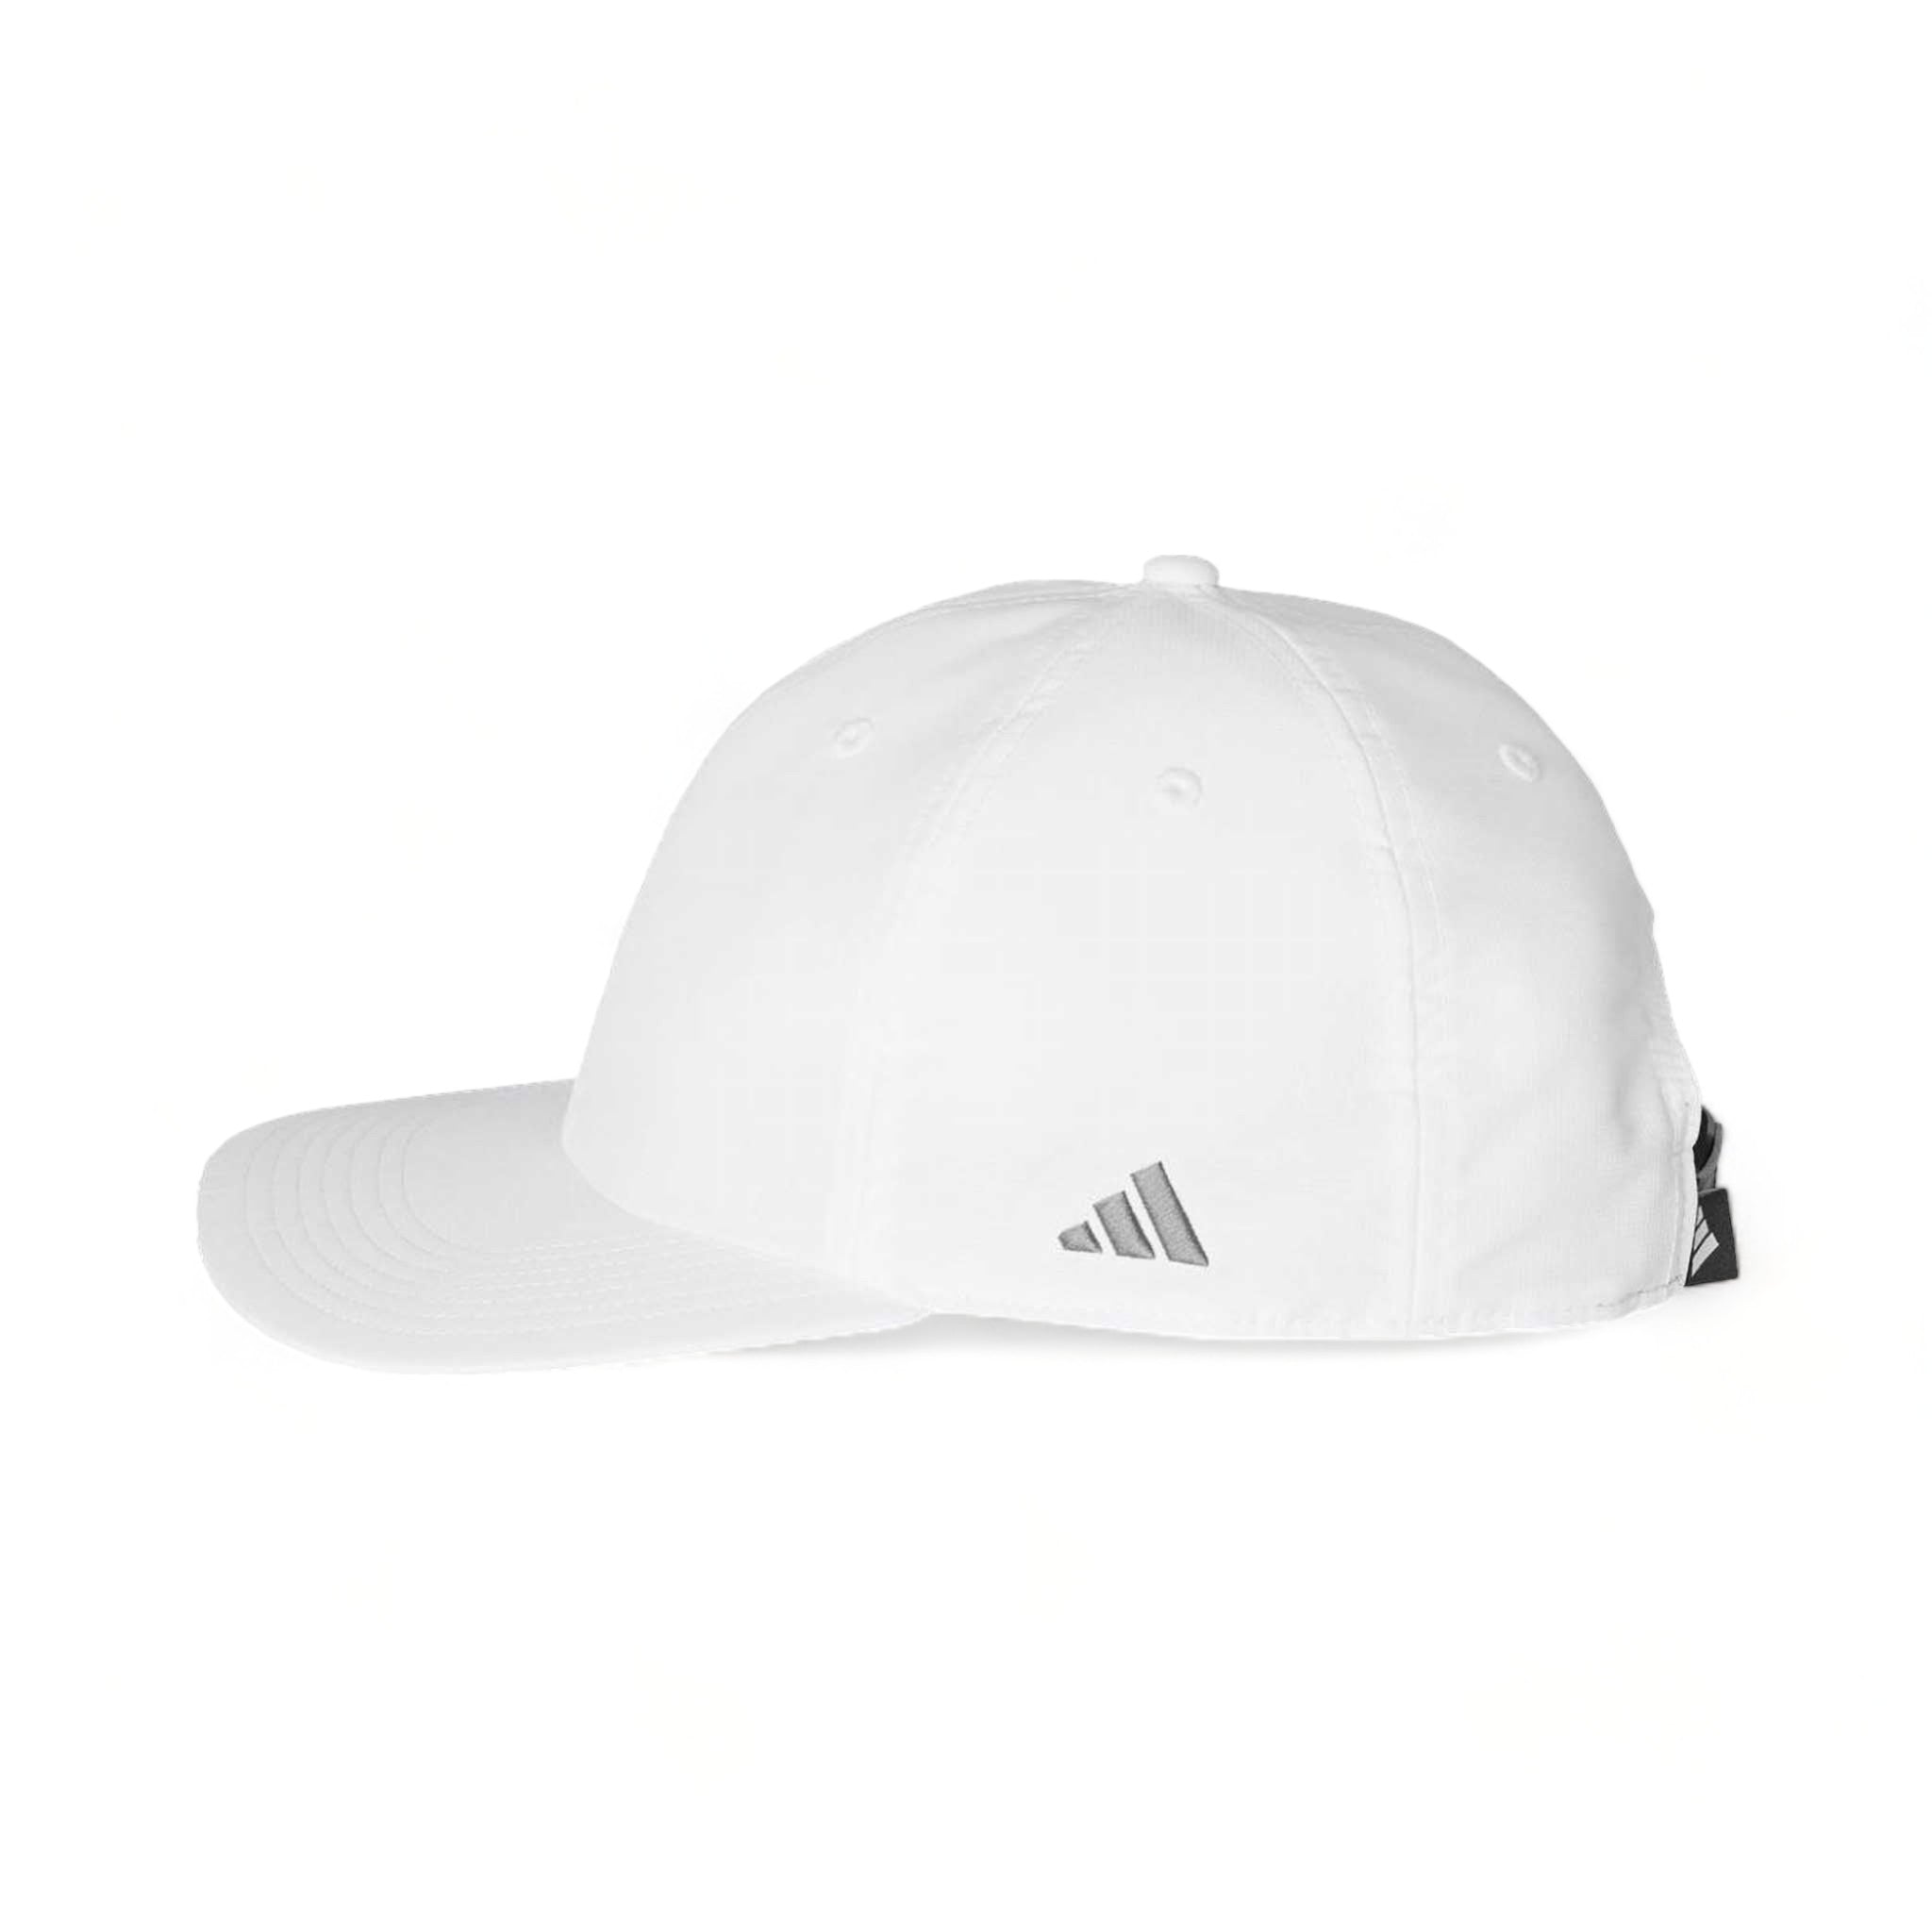 Side view of Adidas A605S custom hat in white